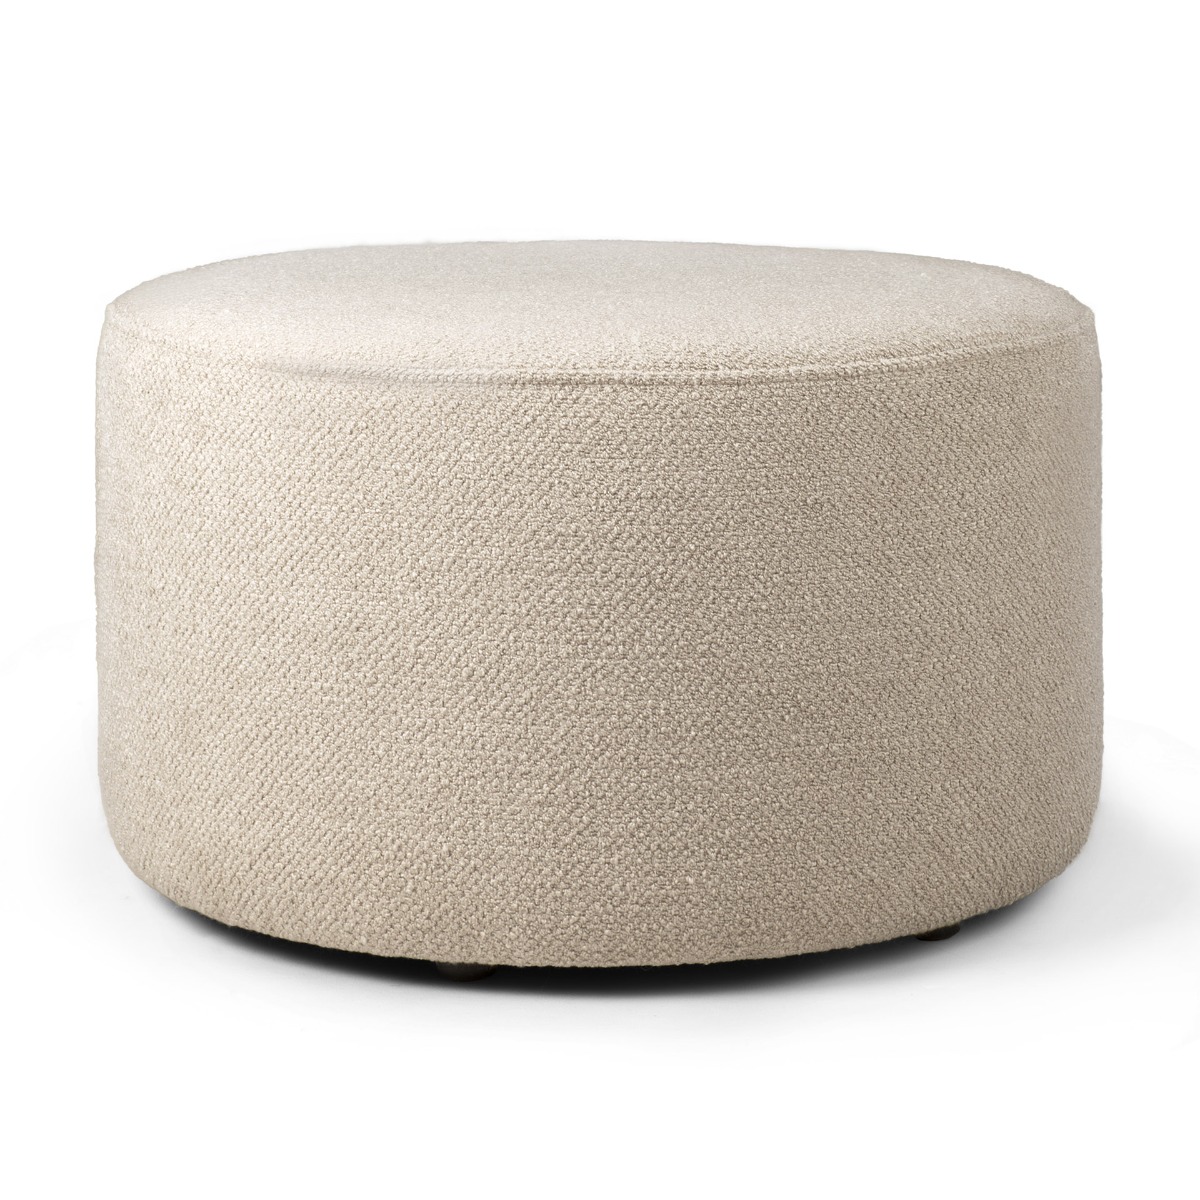 Barrow footstool Round in Off White